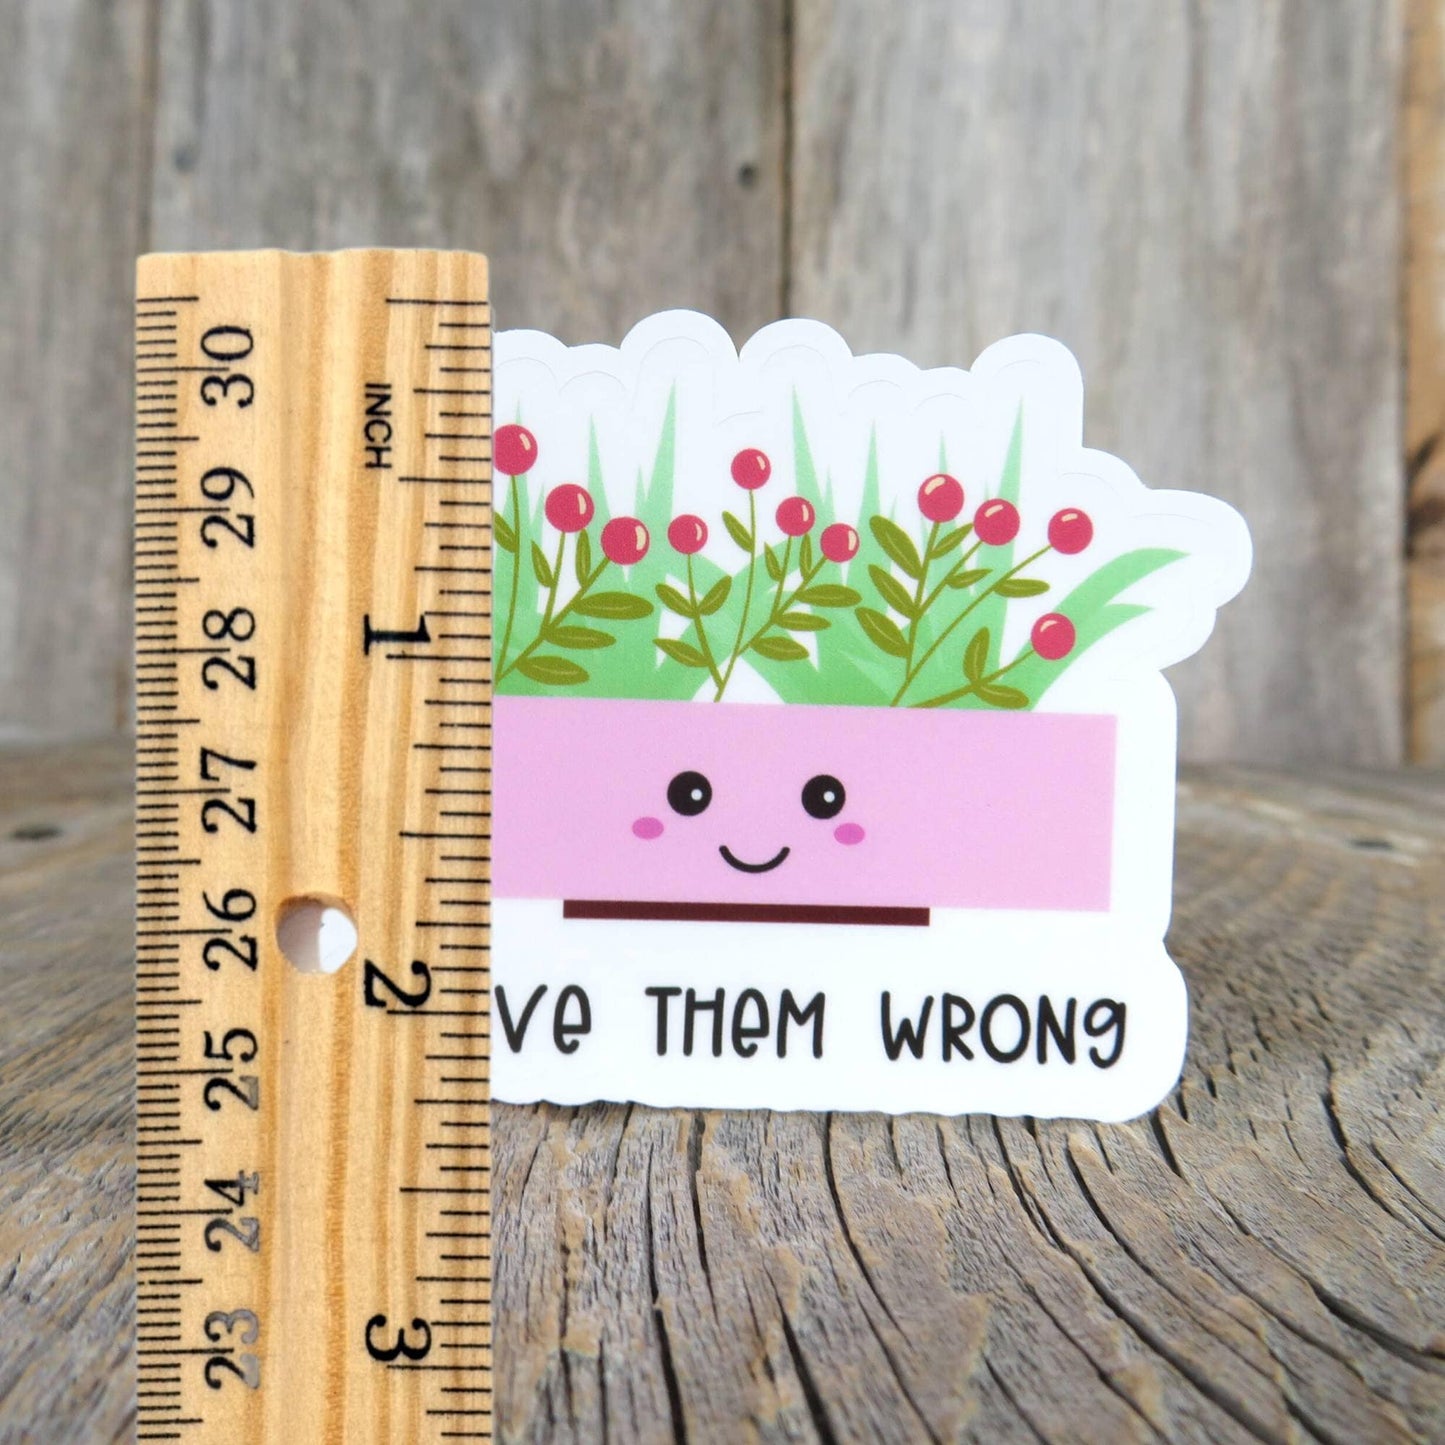 Prove Them Wrong Sticker Cute Plant Positive Uplifting Full Color Waterproof